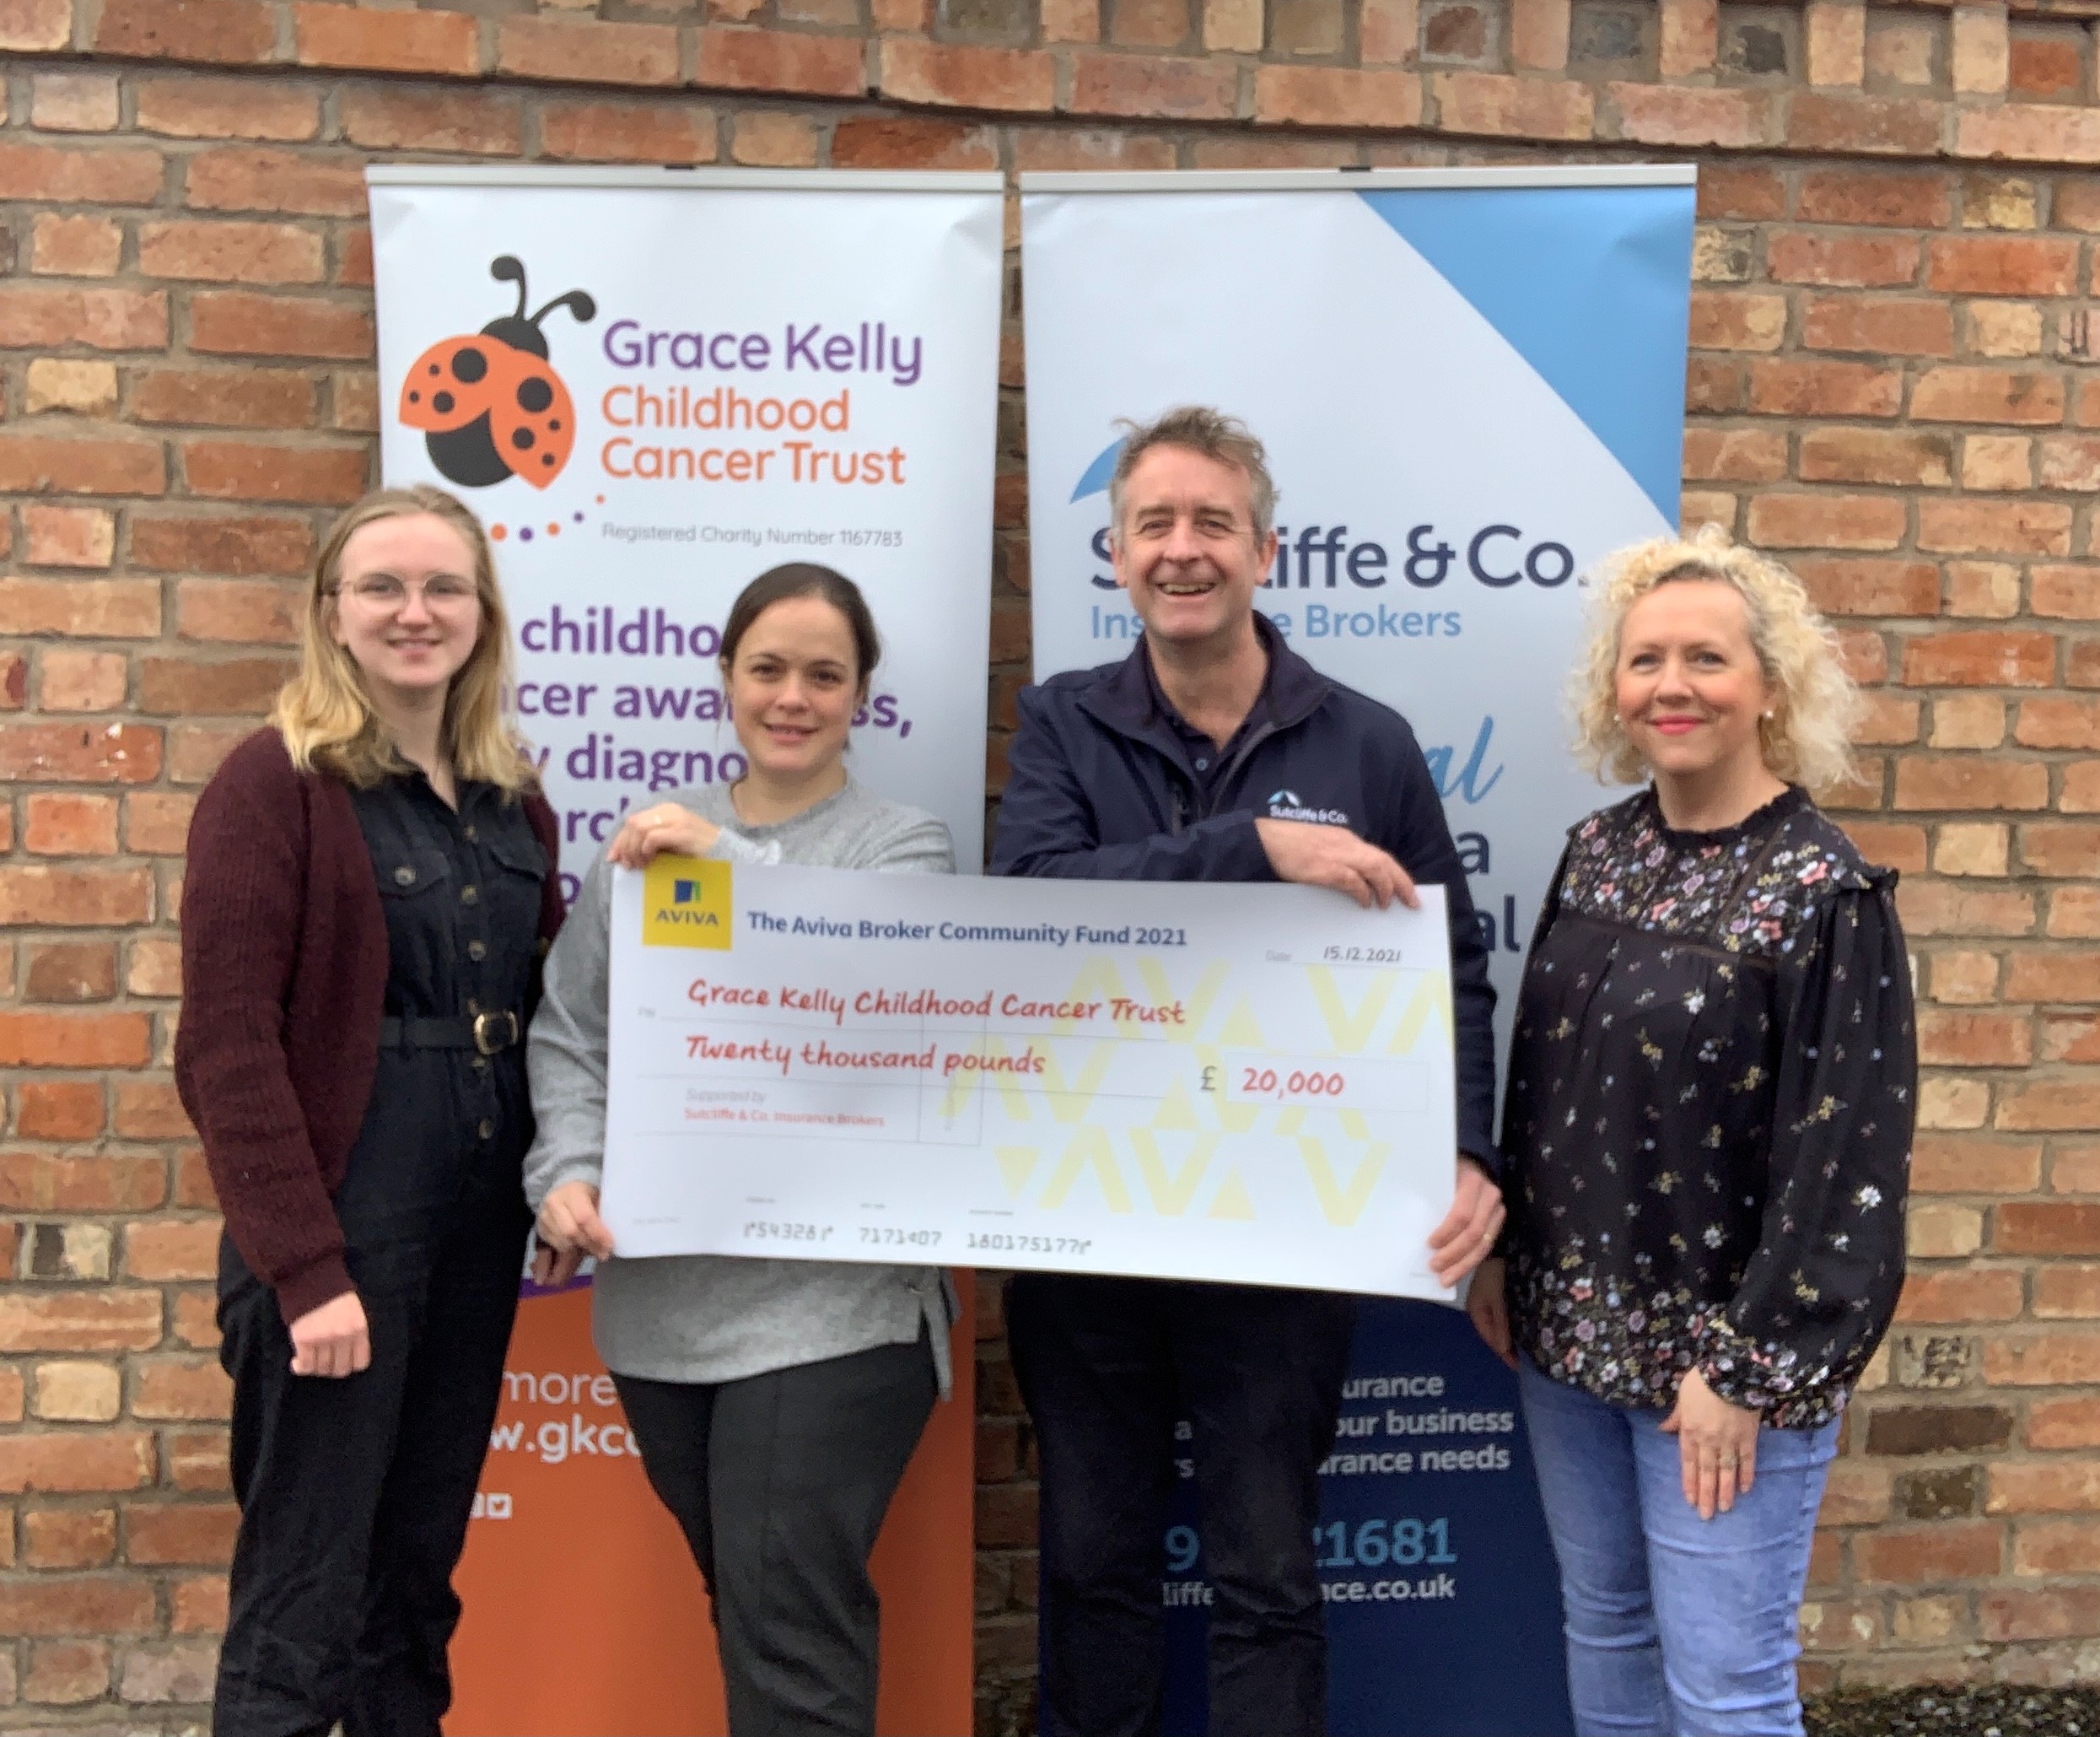 Sutcliffe & Co Wins £20,000 For Childhood Cancer Charity